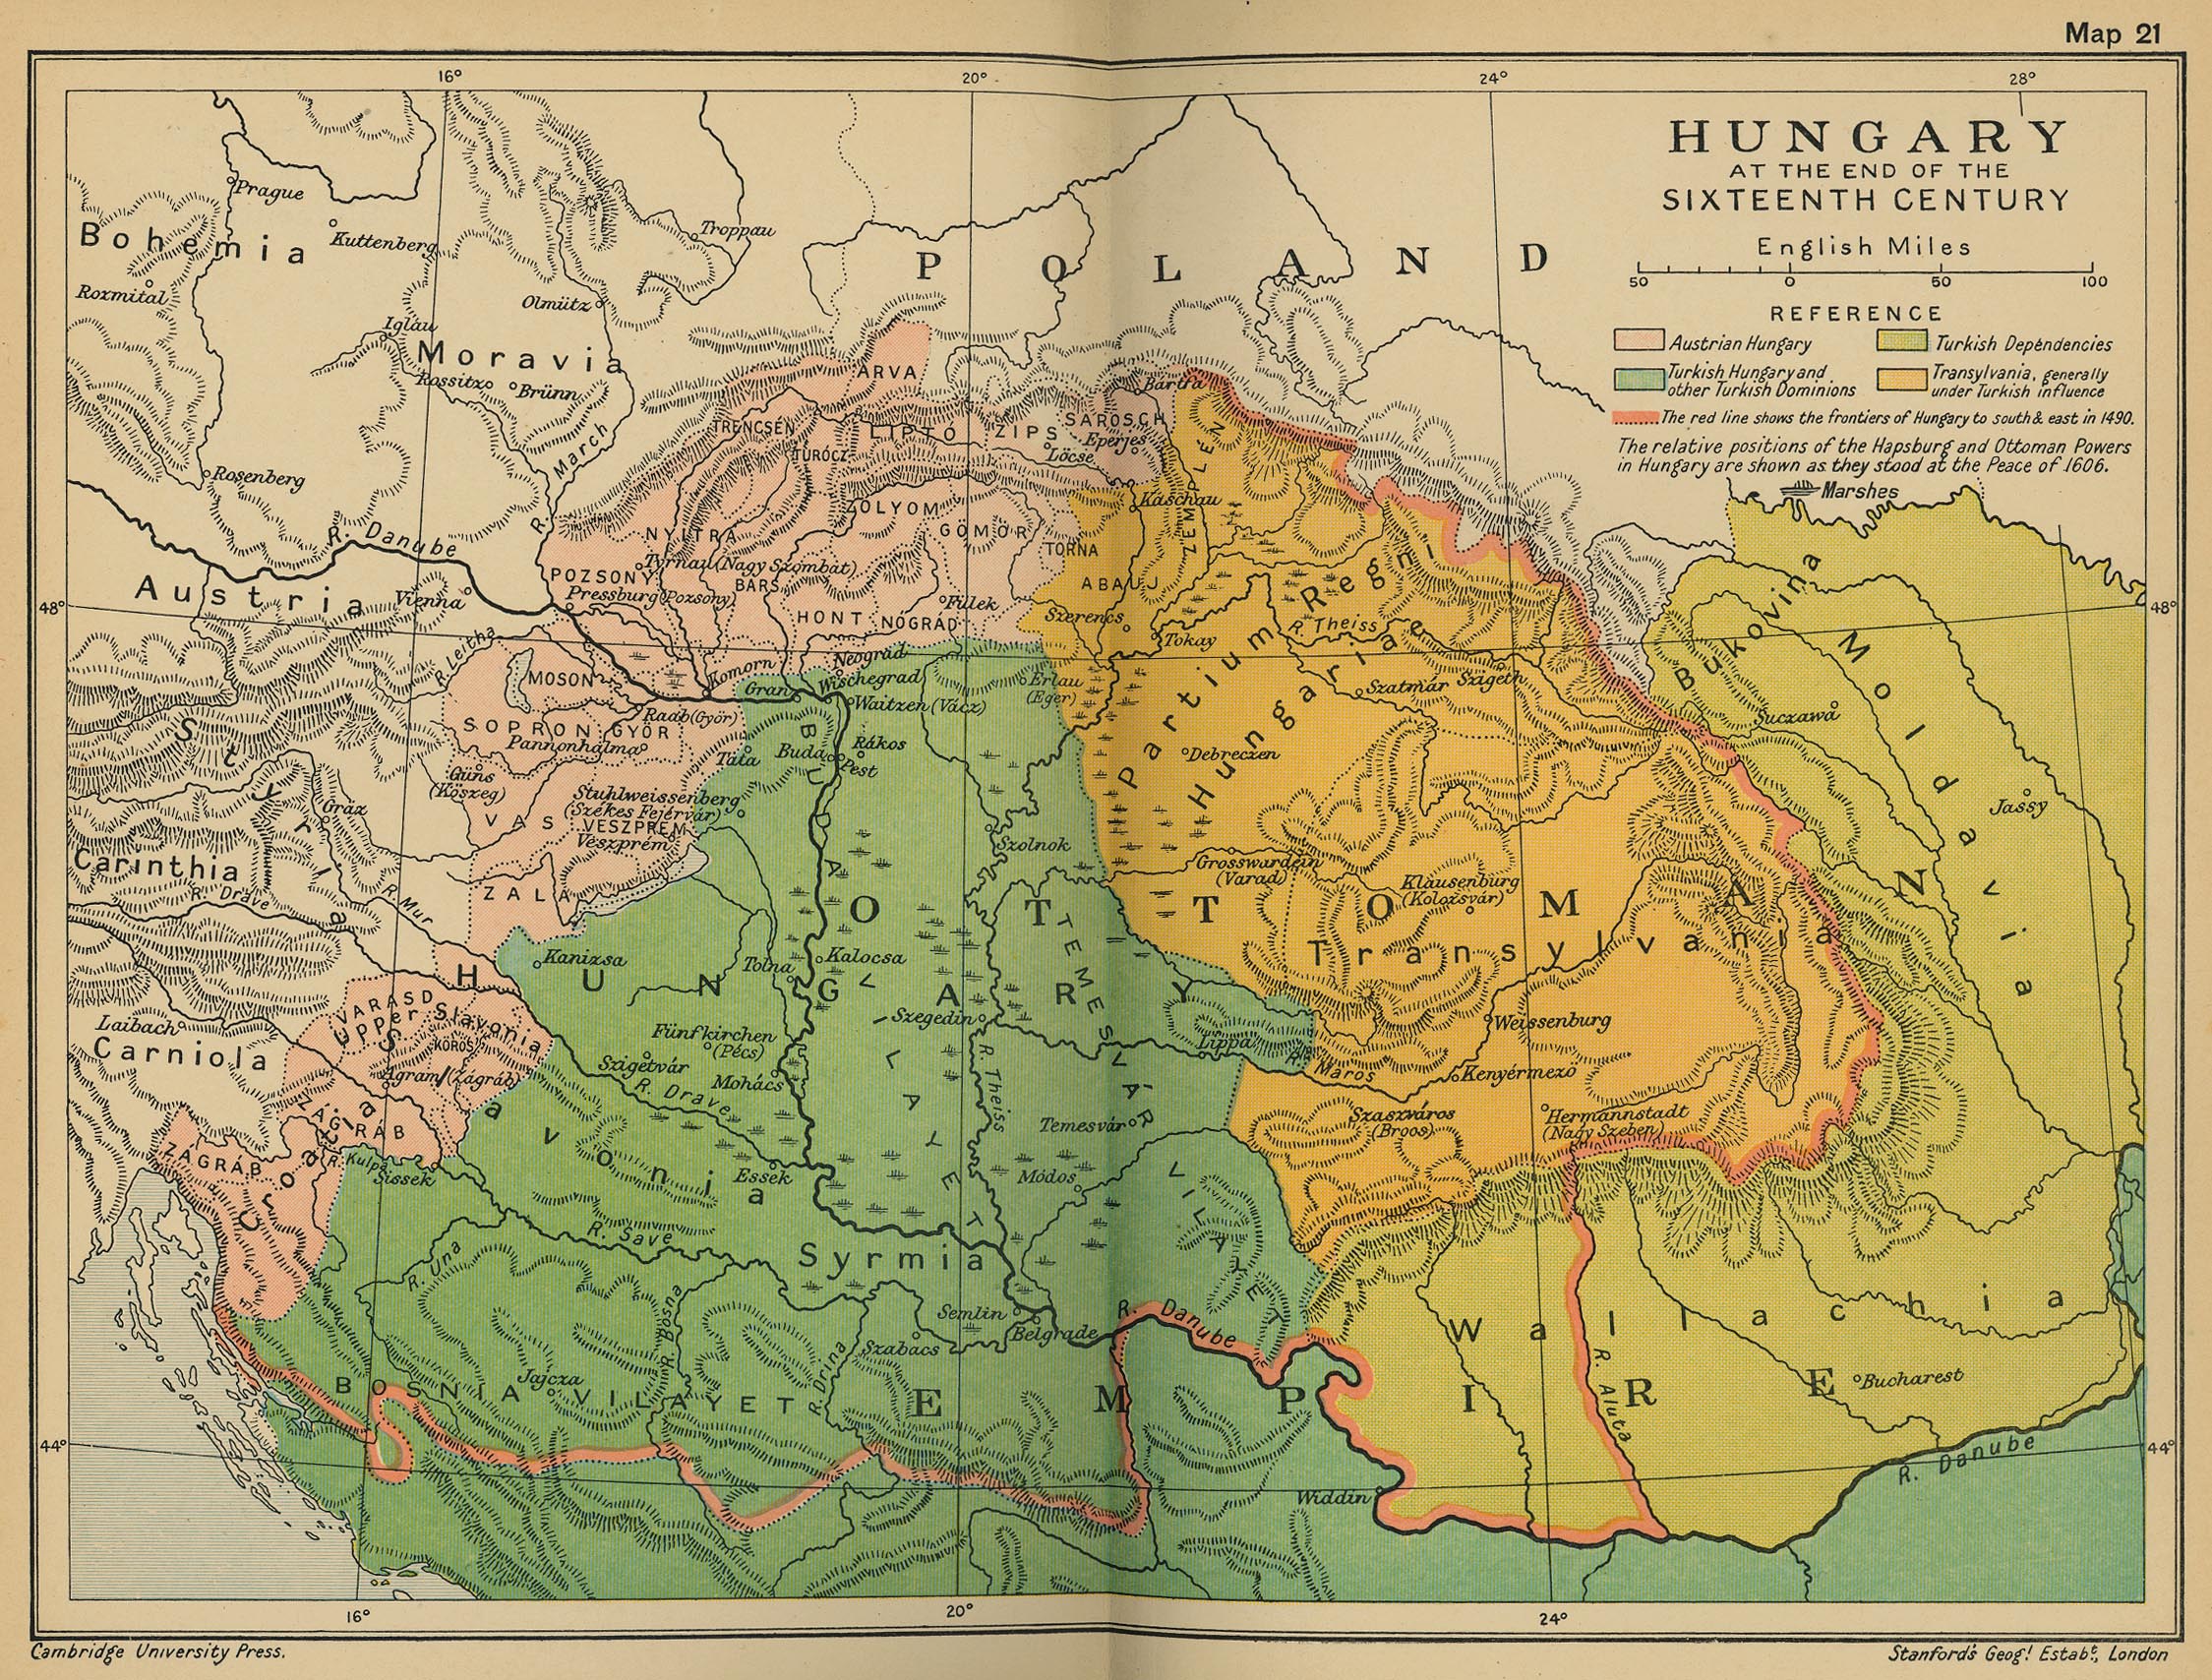 Map of Hungary at the end of the Sixteenth Century